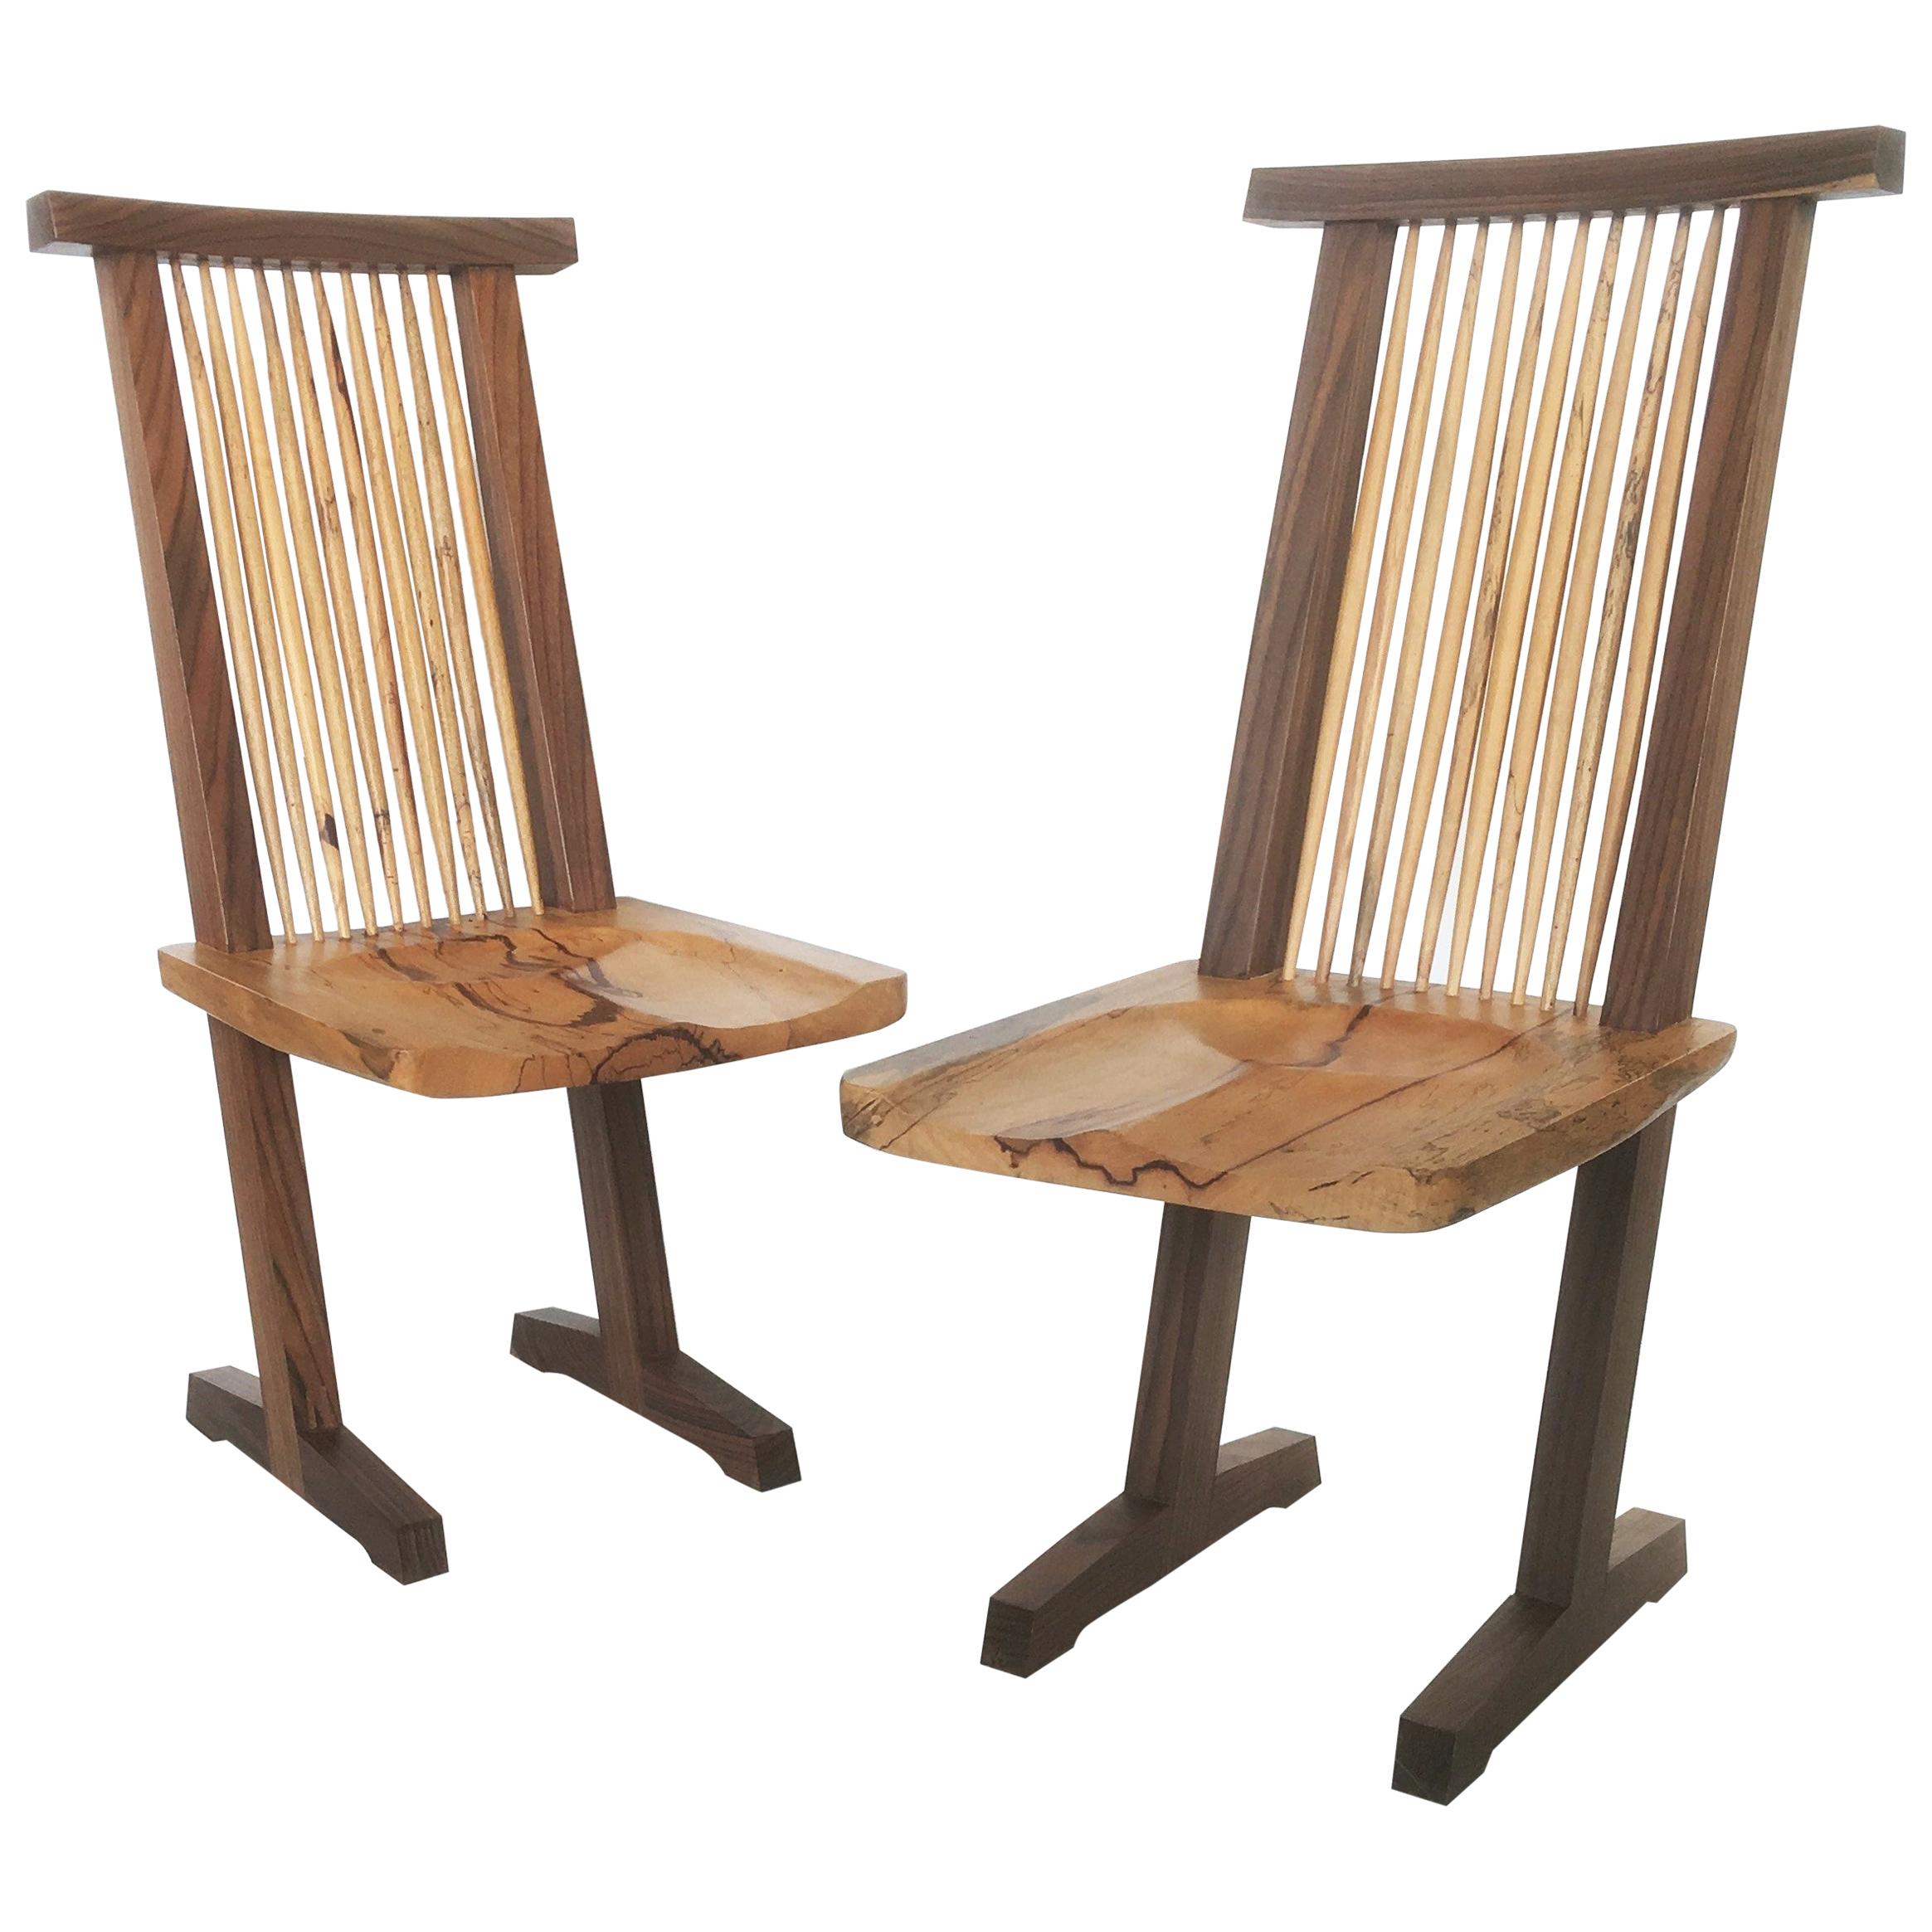 Vintage Pair of Conoid Chairs, after George Nakashima